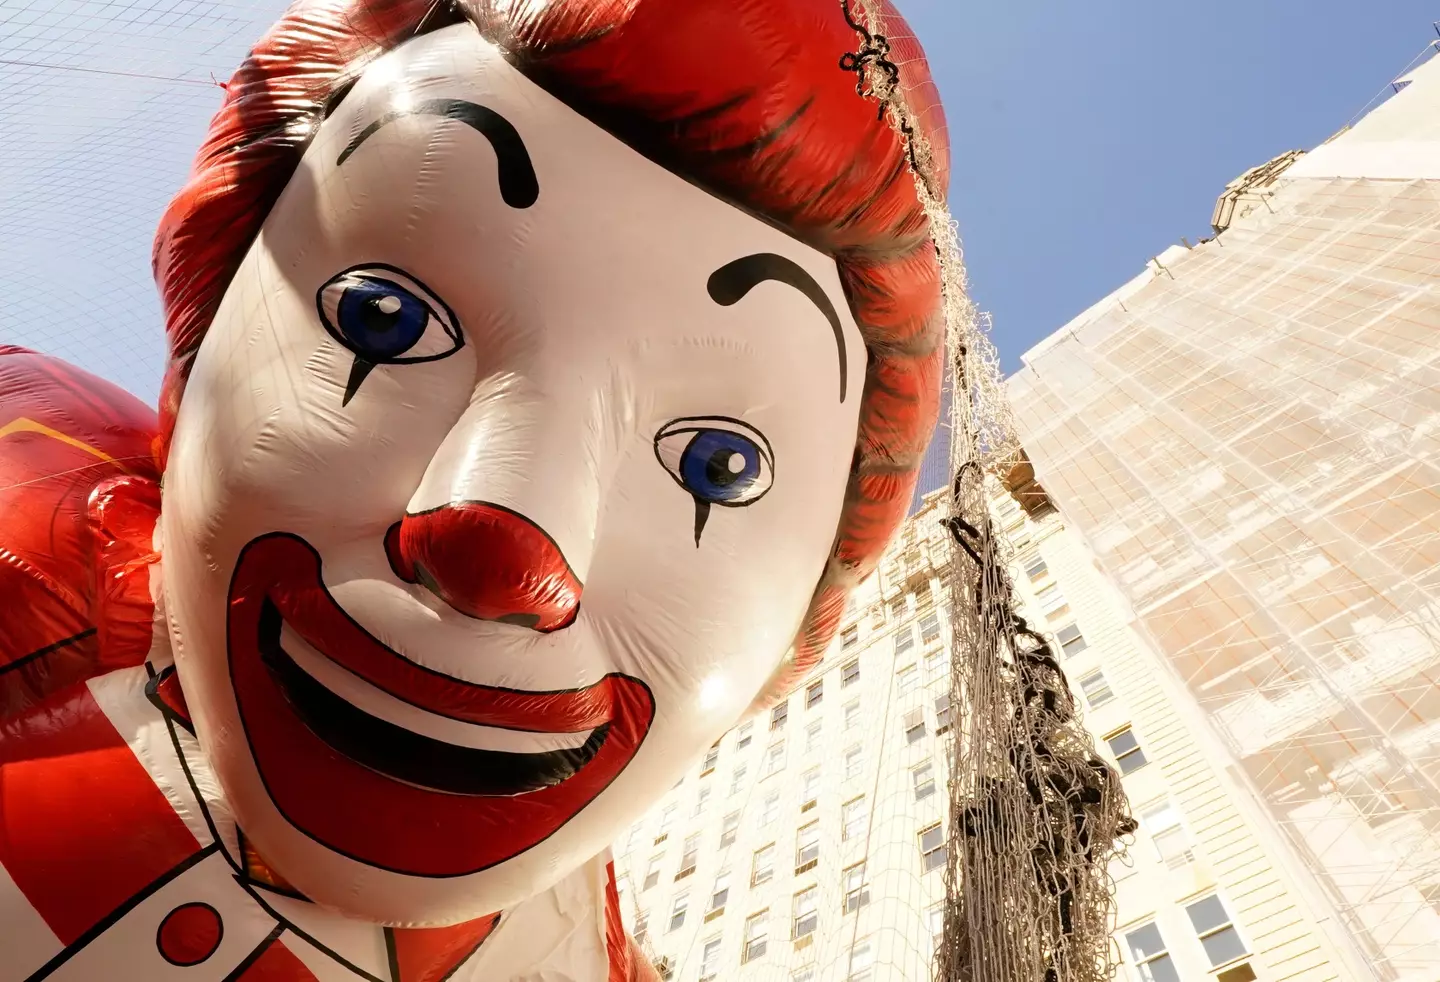 A Ronald McDonald blimp in New York (TIMOTHY A. CLARY/AFP via Getty Images)